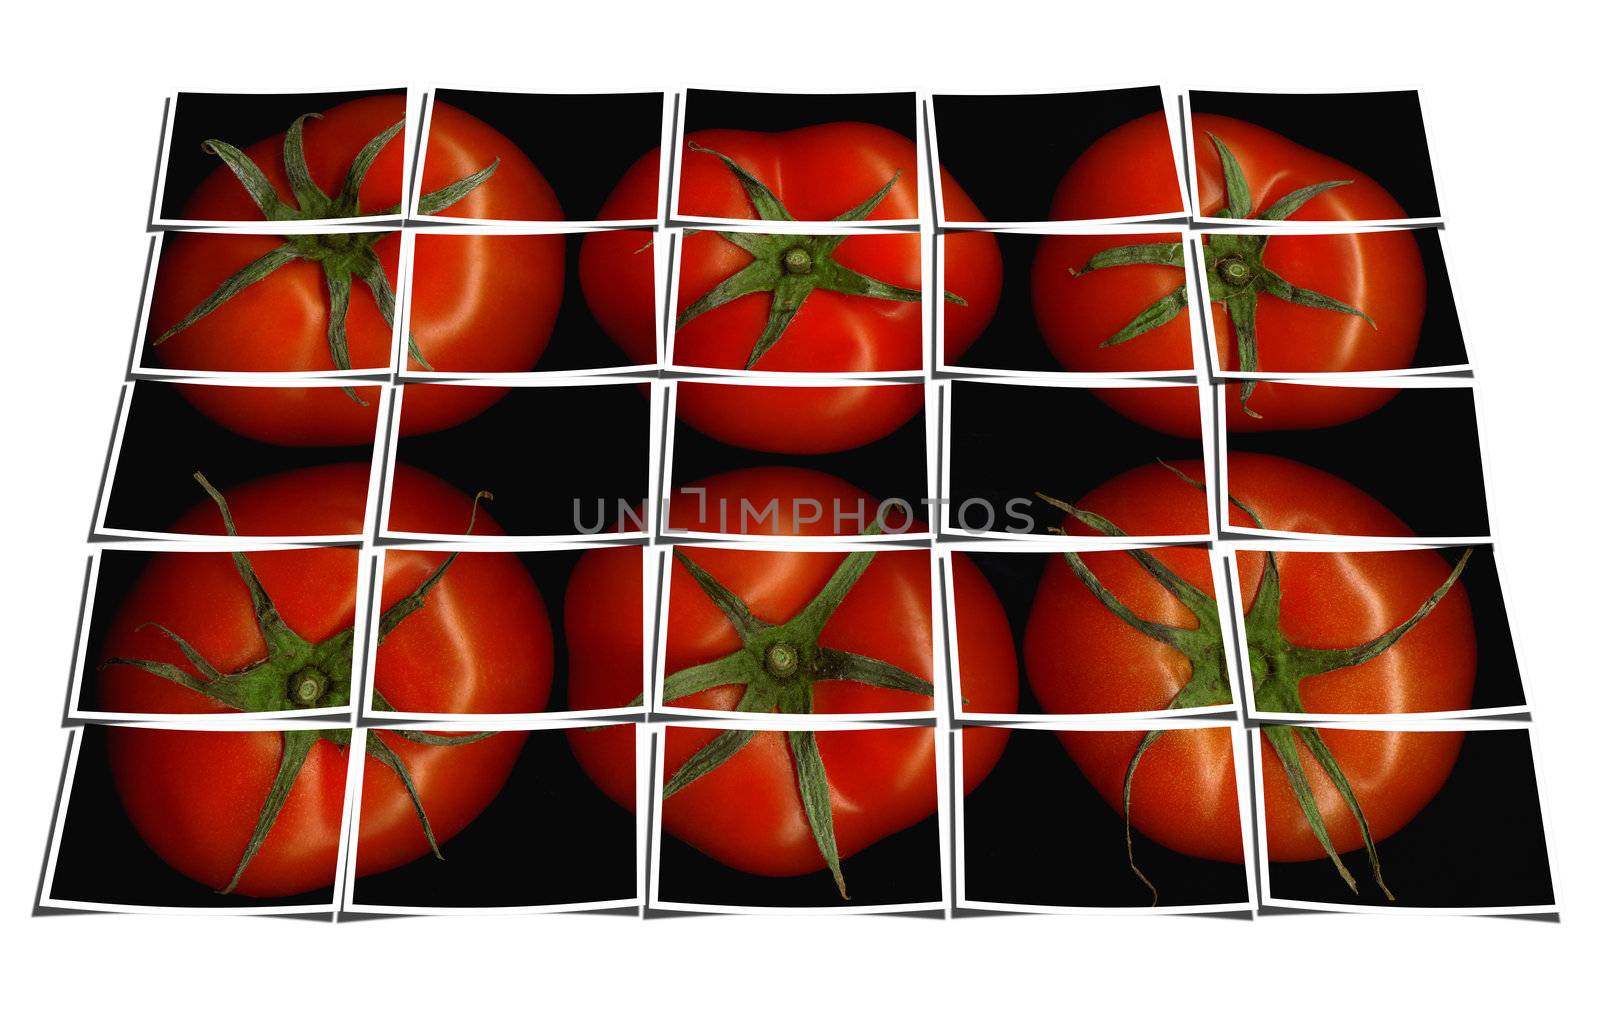 tomato on black background puzzle collage cut out composition over white